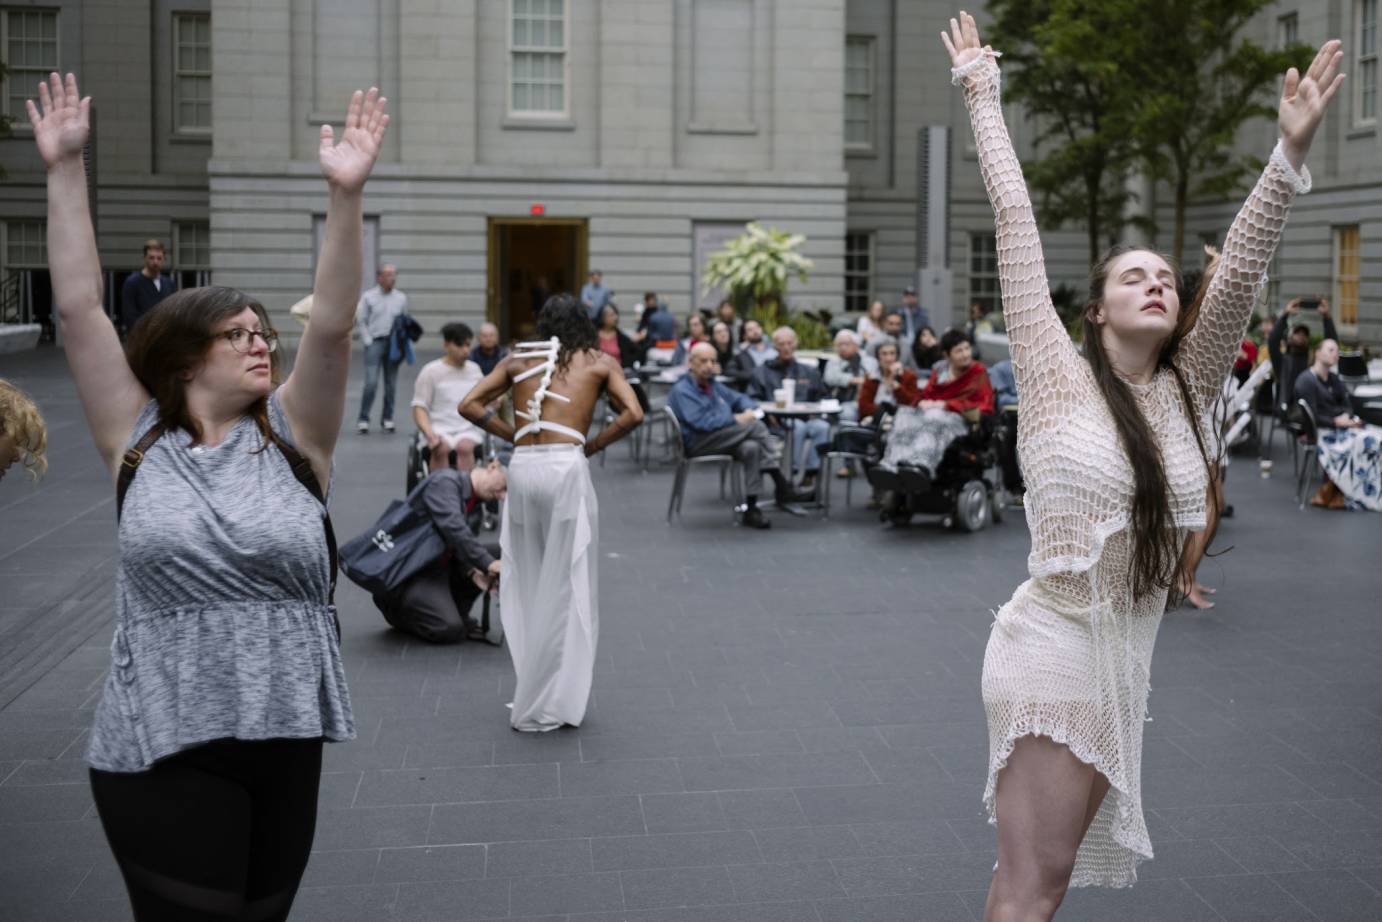 Pedestrians participate in ON DISPLAY with white-clad dancers